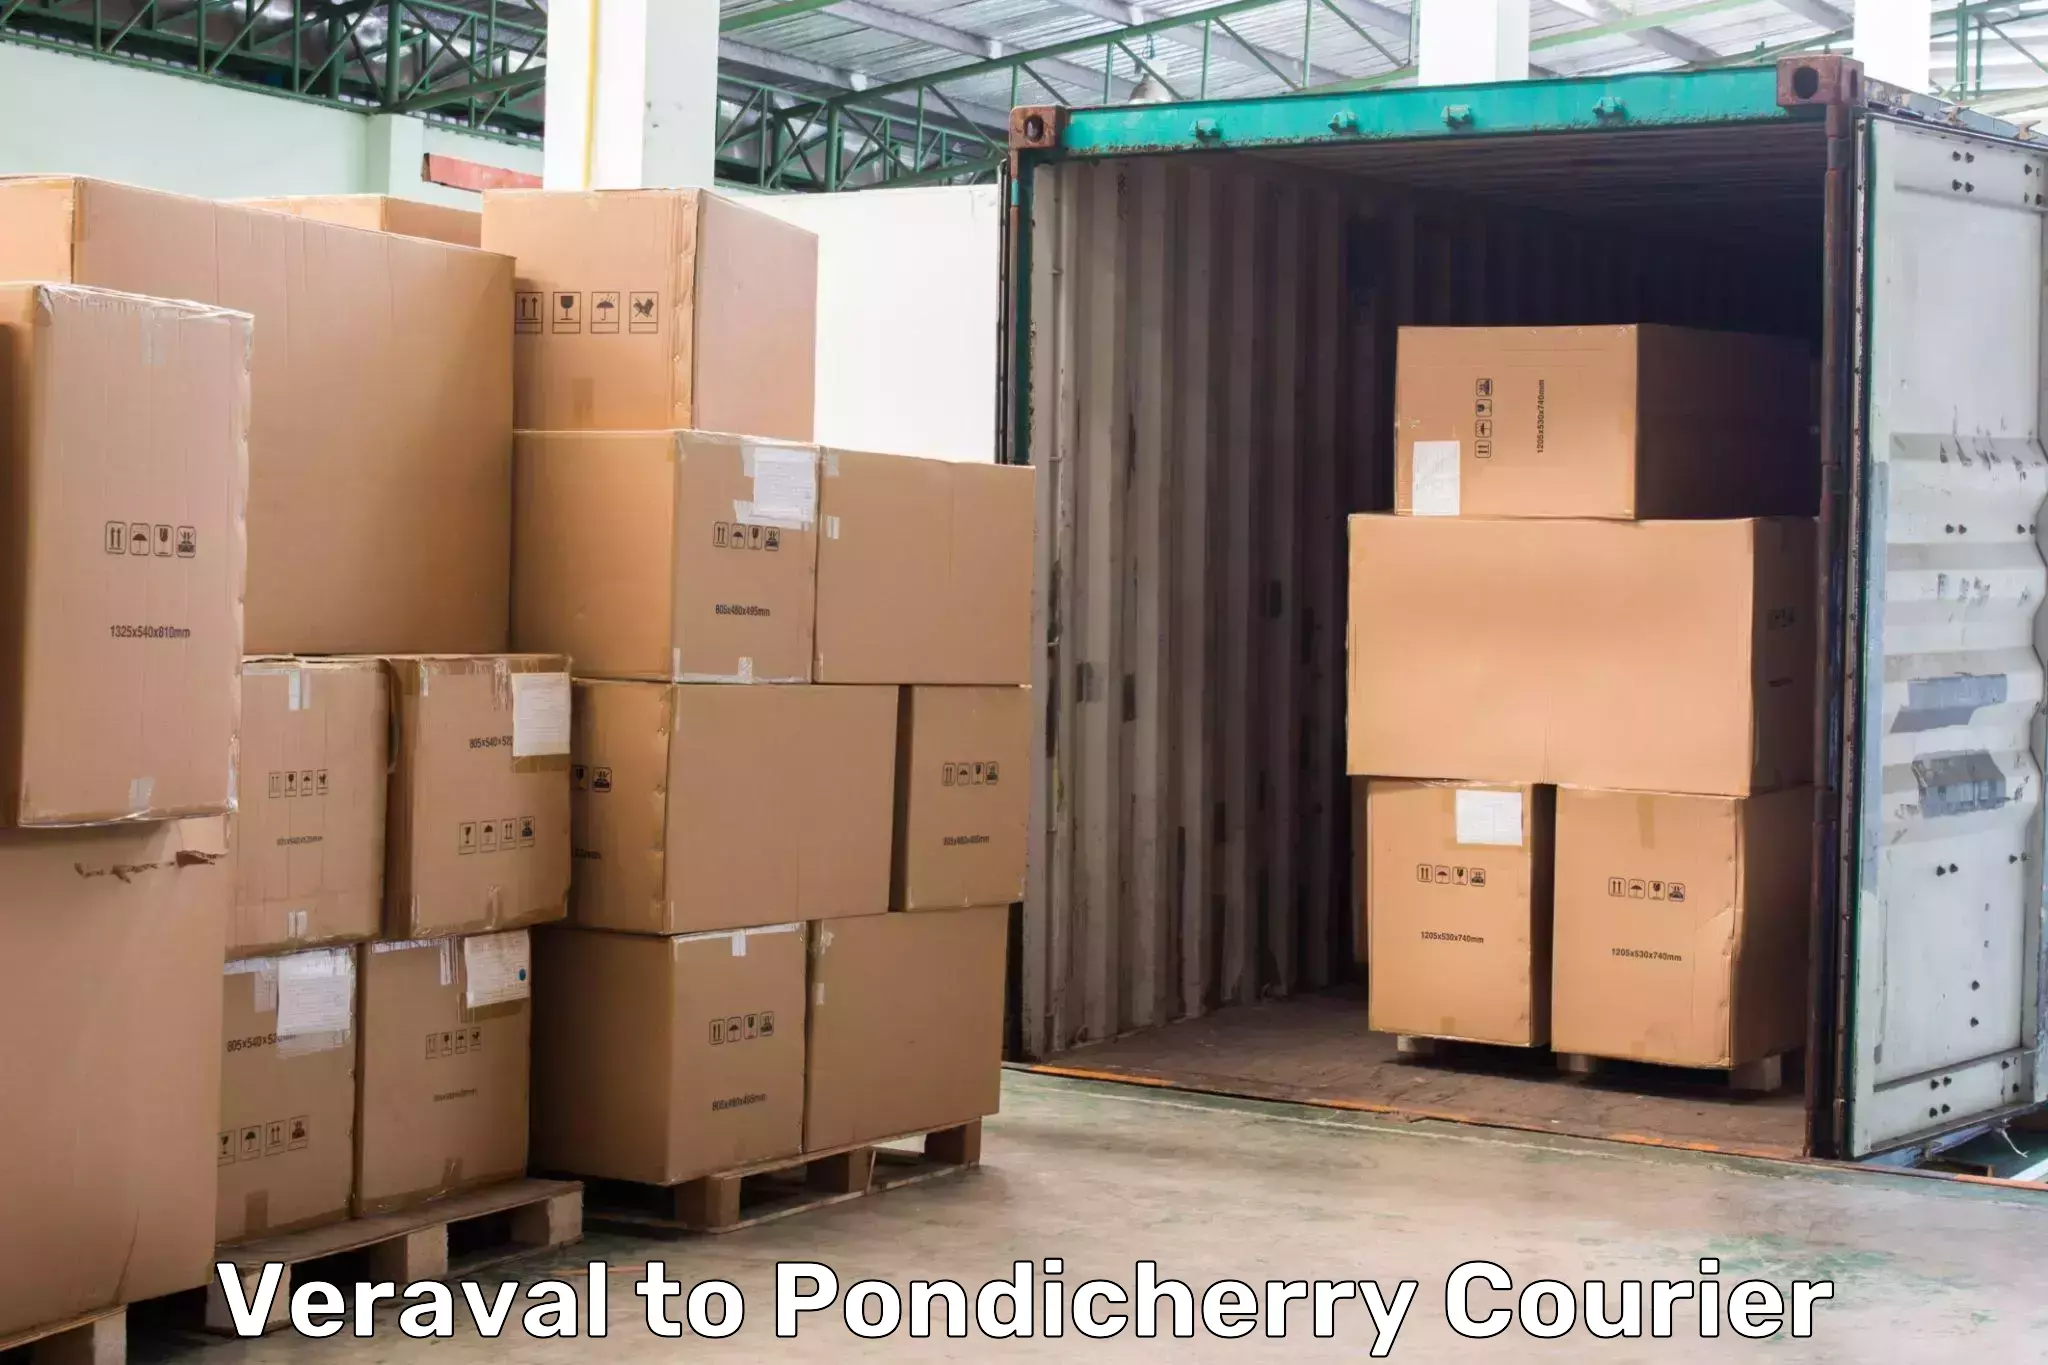 Package delivery network Veraval to Pondicherry